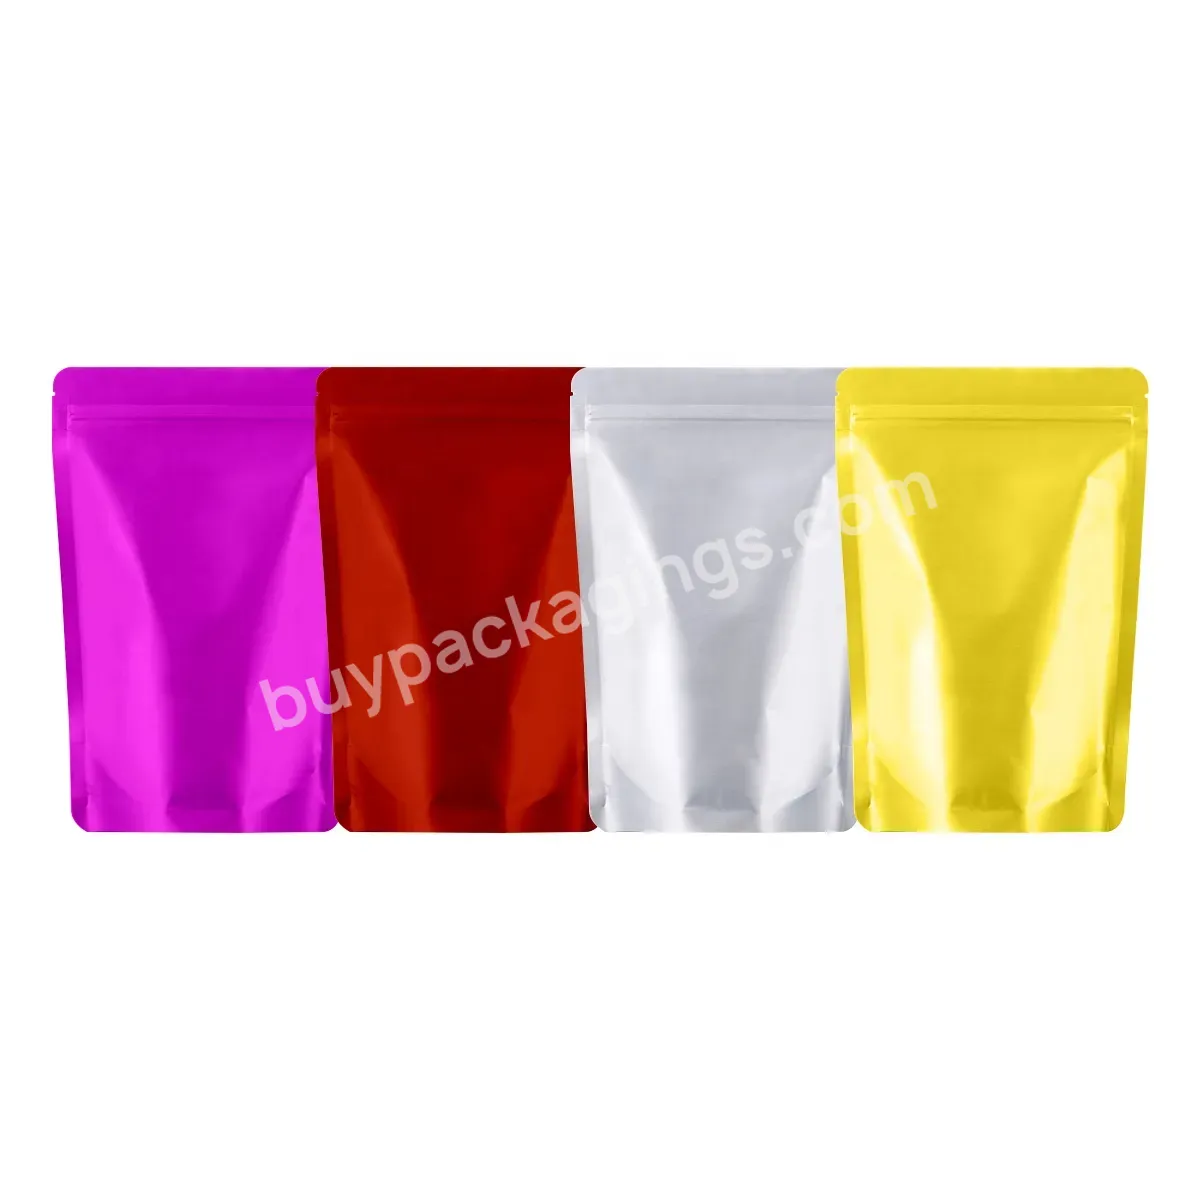 Holographic Custom Stand Up Zip Pouch Bag Holographic Bag Die Cut Childproof 3.5g Mylar Bag - Buy 3.5g Mylar Bag,Custom Stand Up Zip Pouch Bag,Die Cut Childproof.